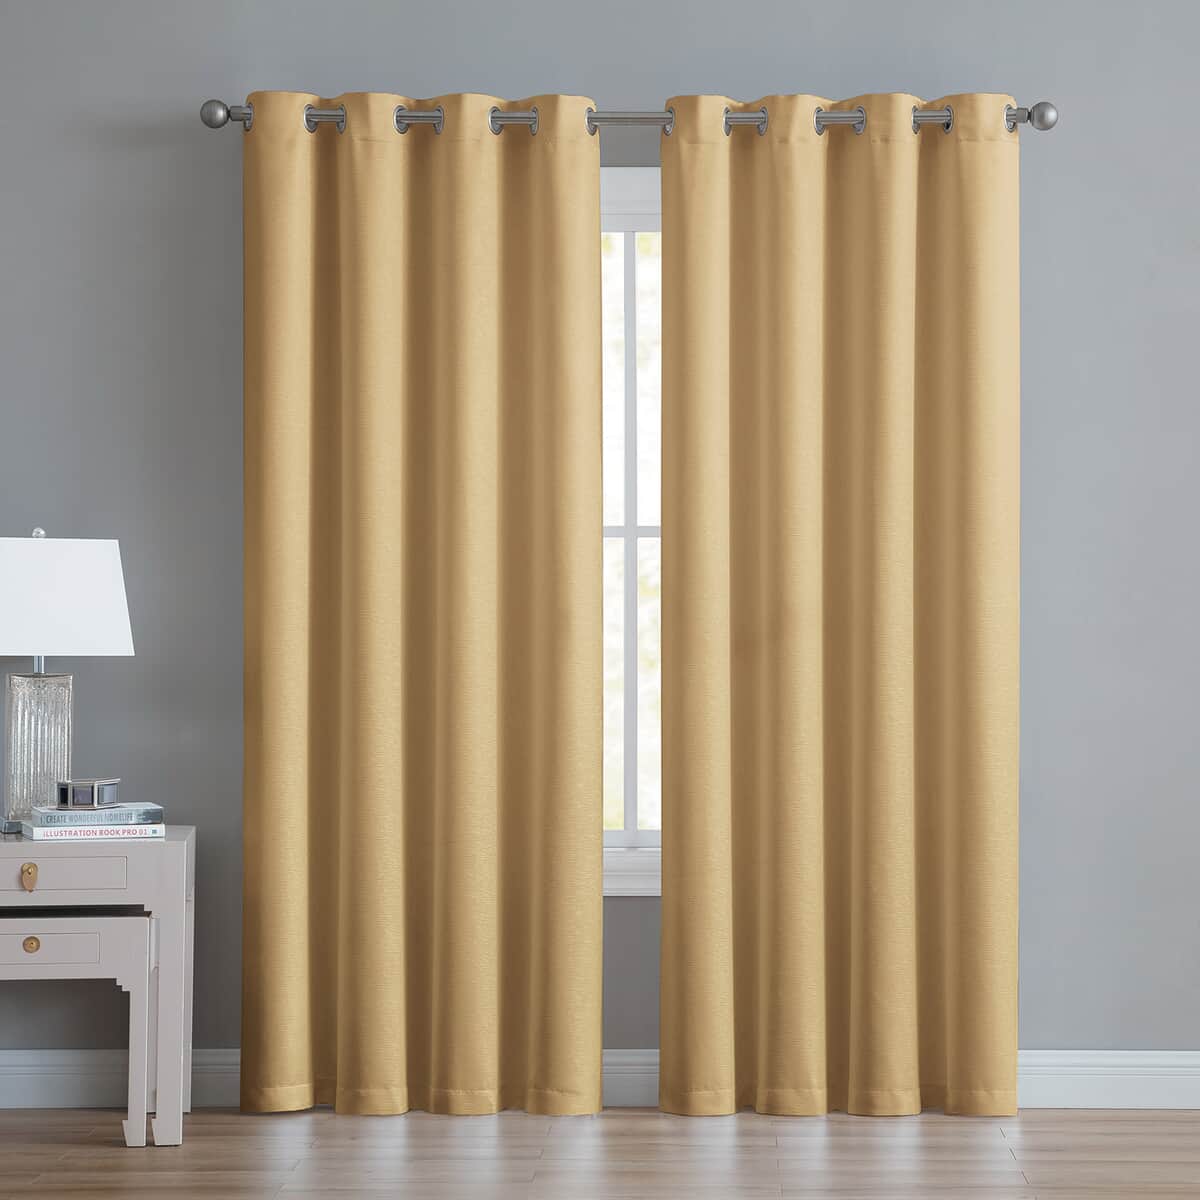 VCNY Single Panel Blackout Curtains - Gold image number 0